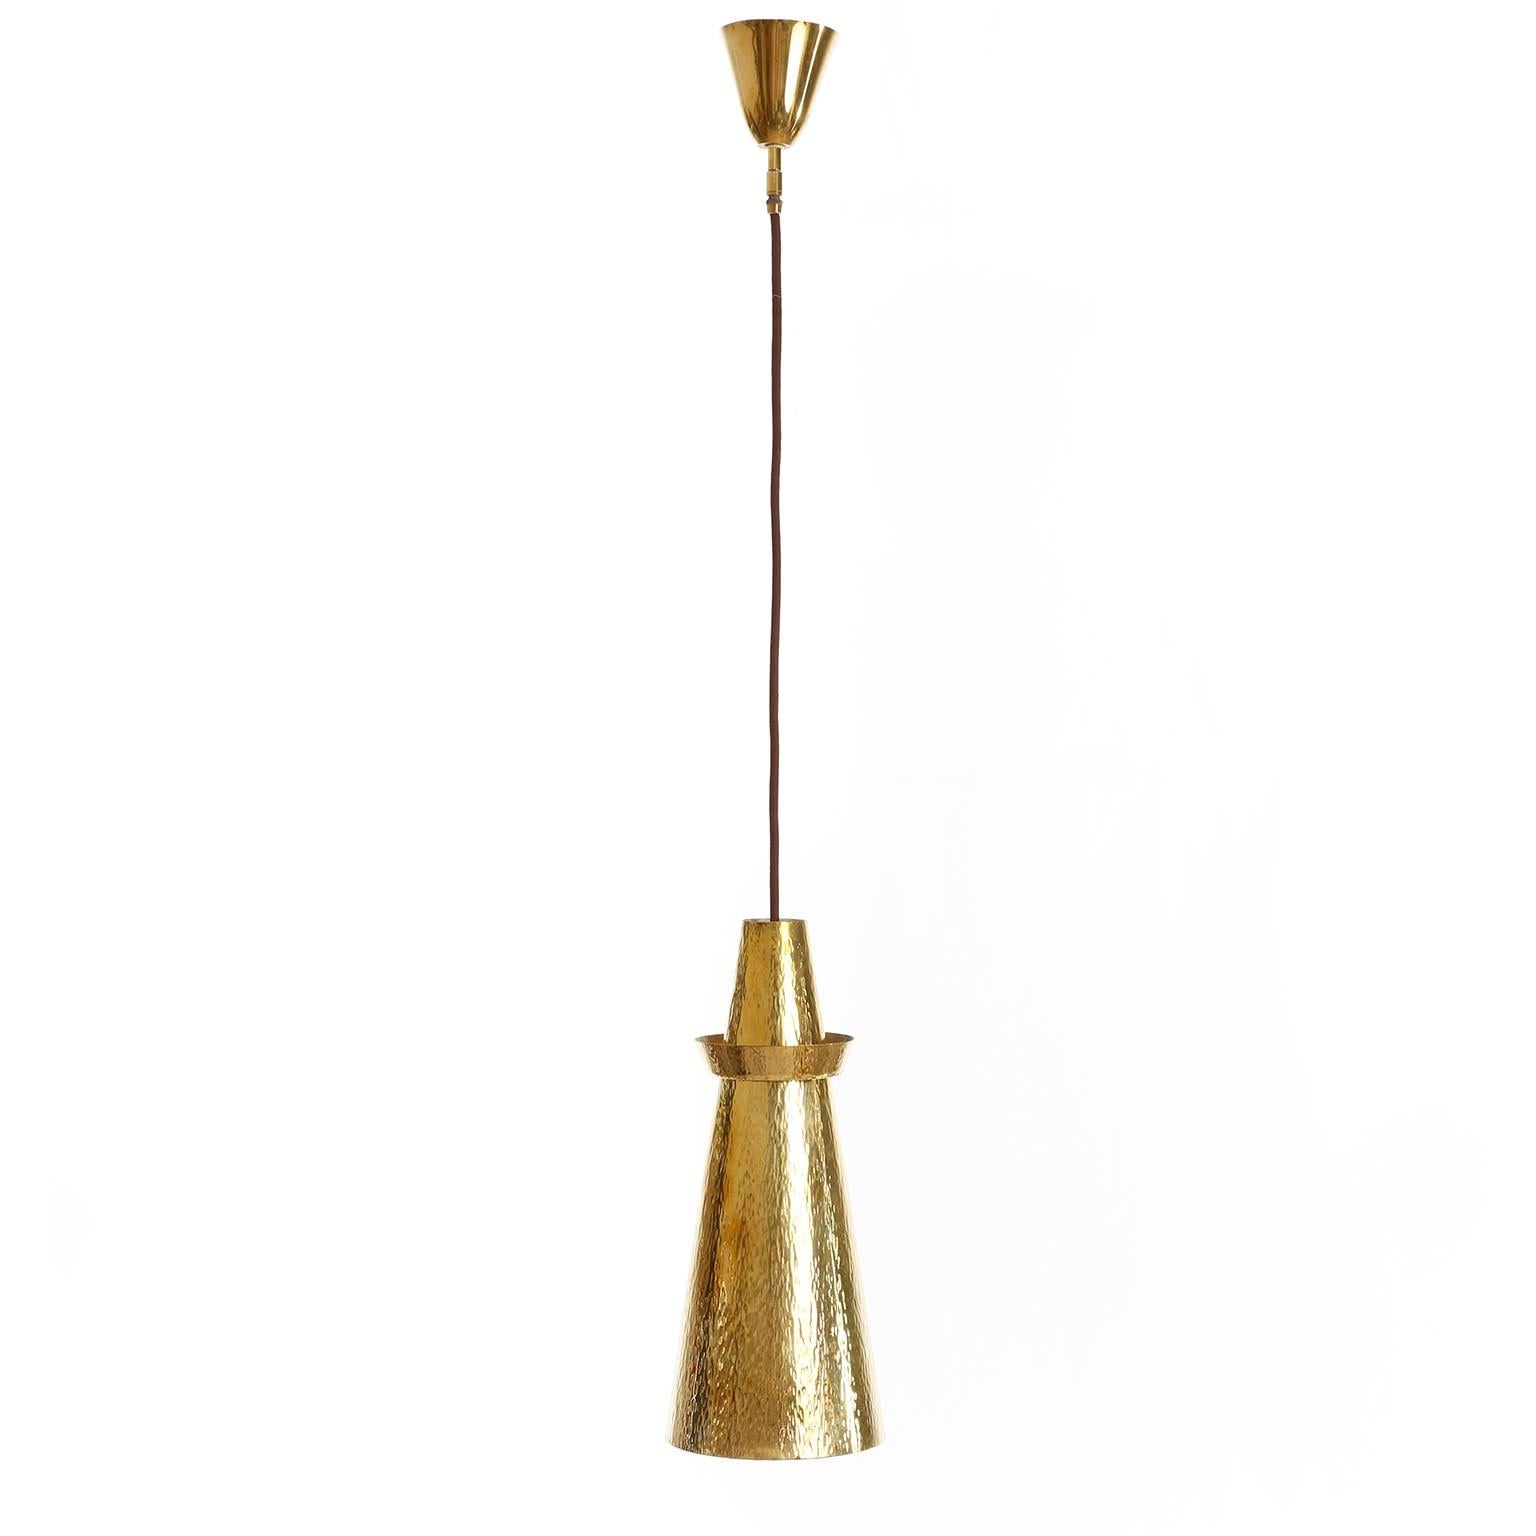 Italian Pair of Mid-Century Modern Pendant Lights, Hammered Polished Brass, 1960s For Sale